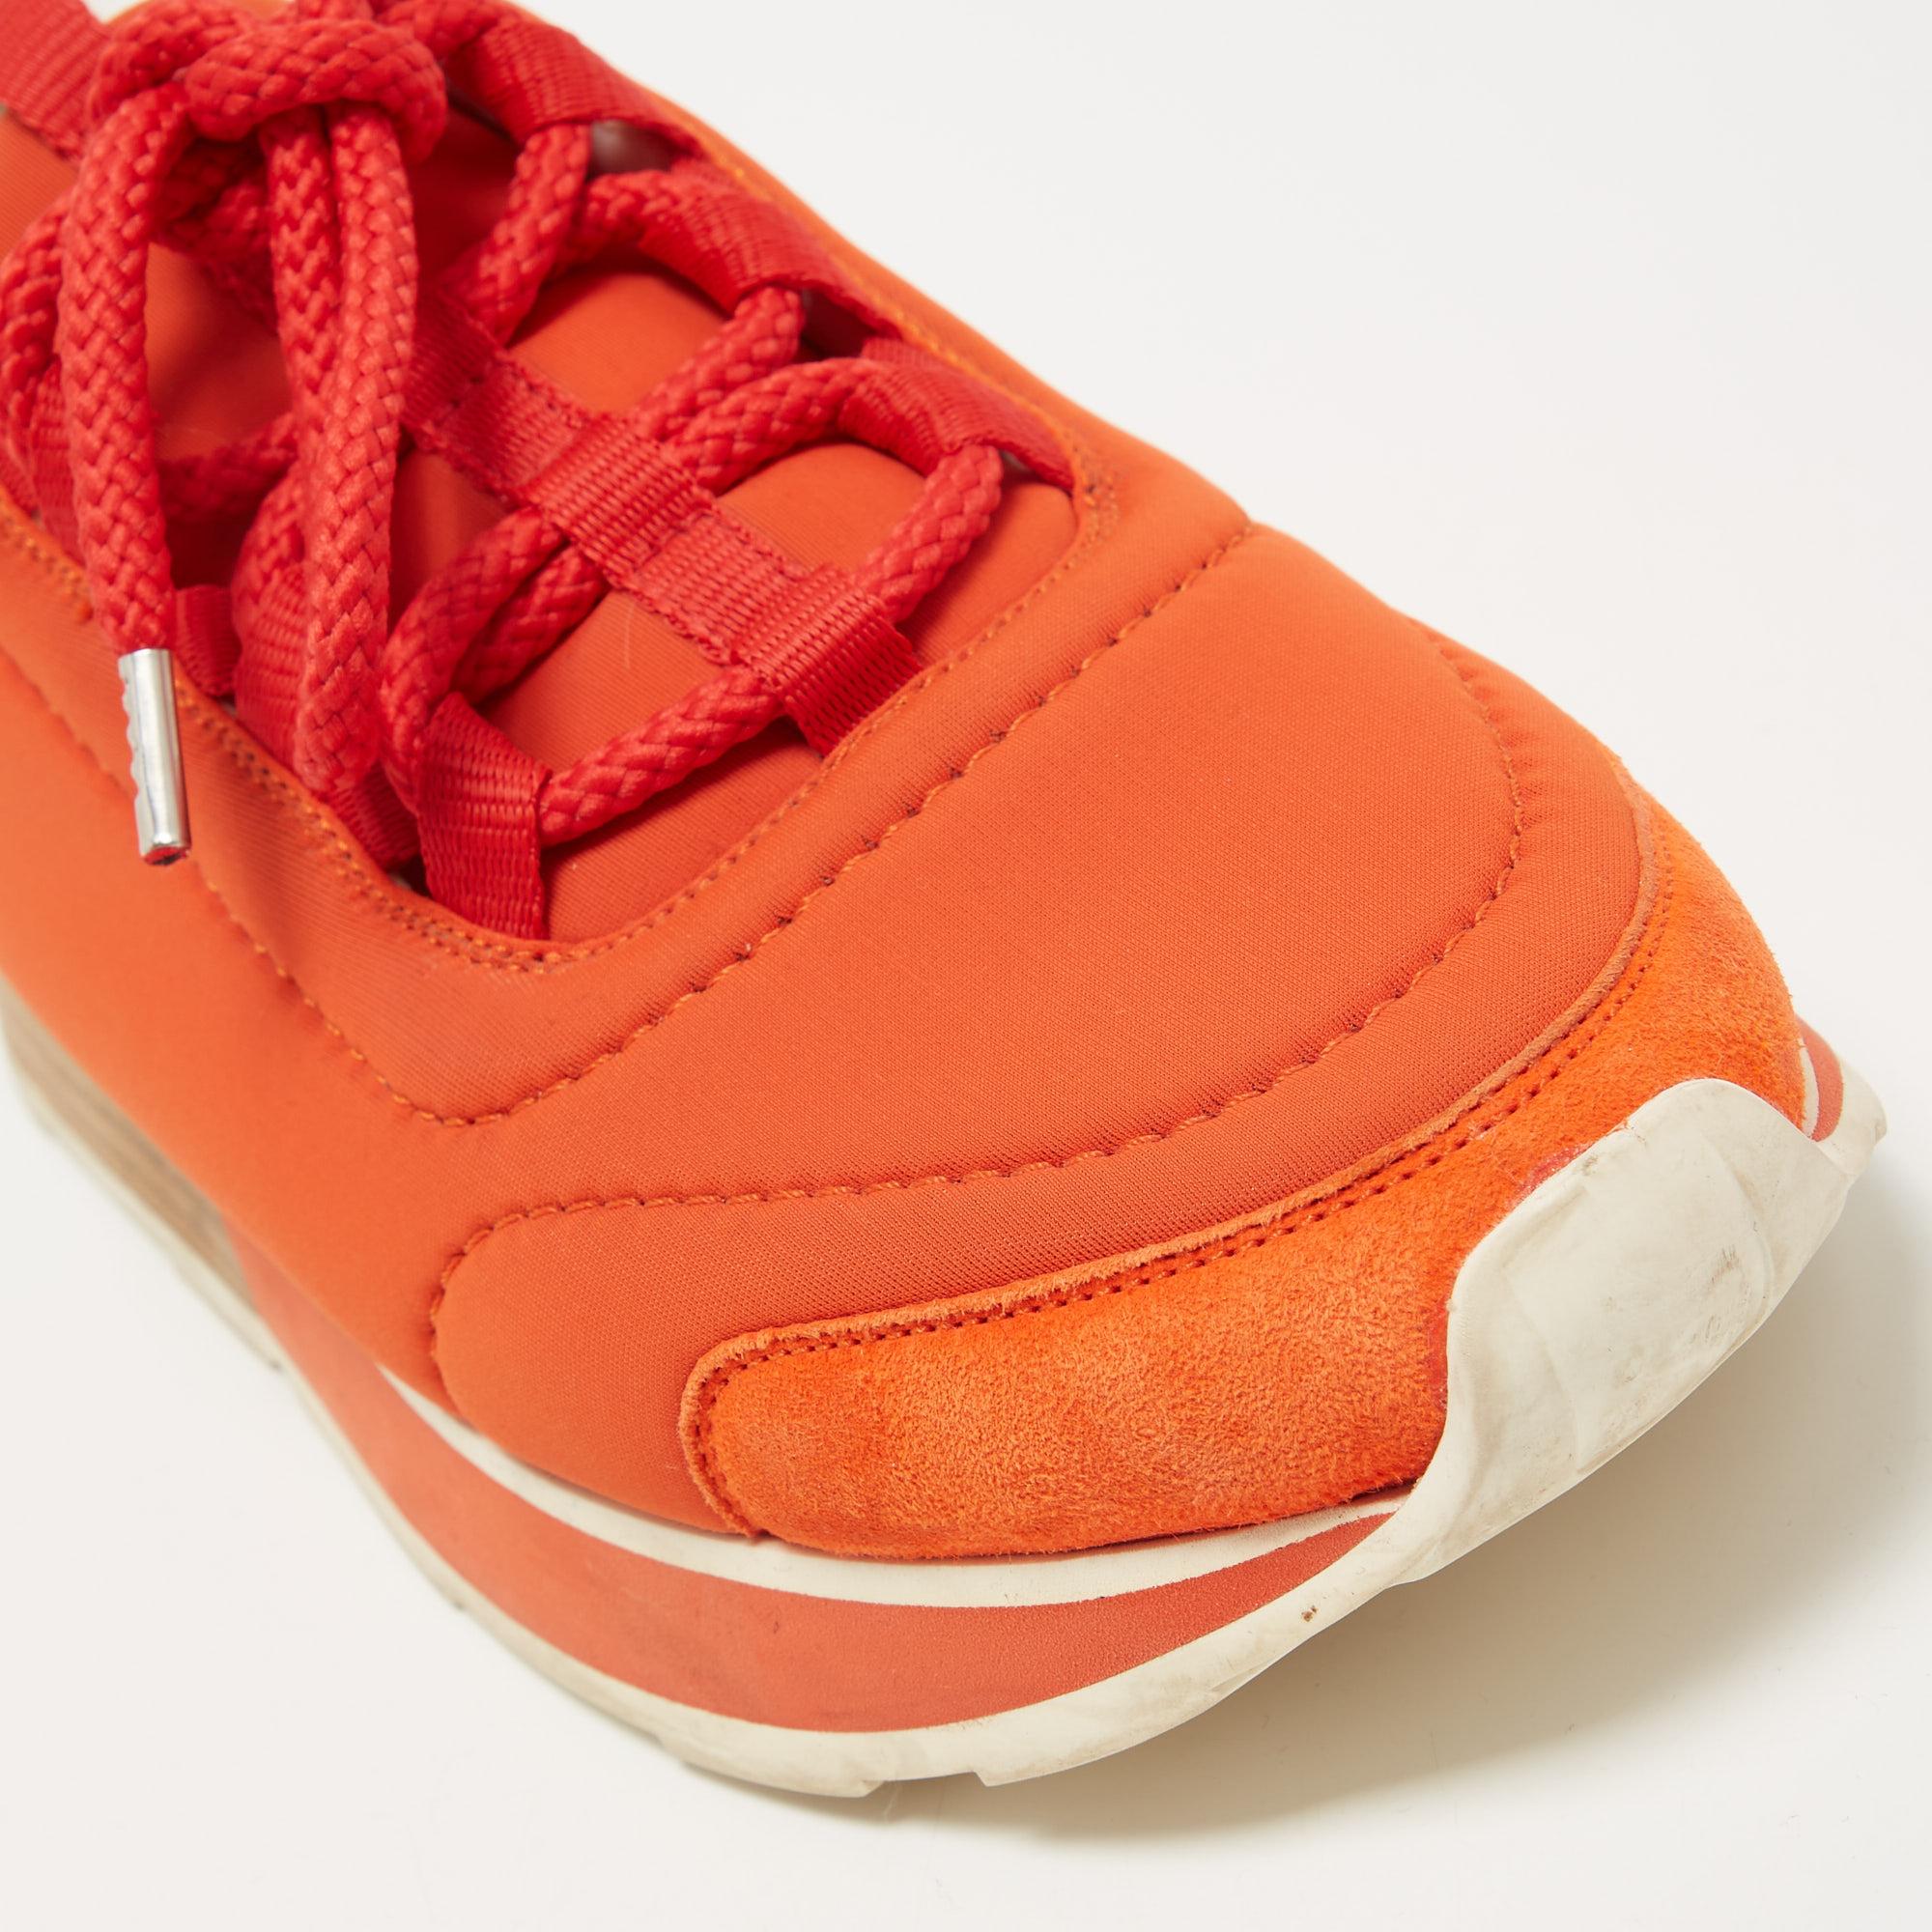 Hermes Orange/White Nylon and Leather Buster Sneakers Size 37.5 2